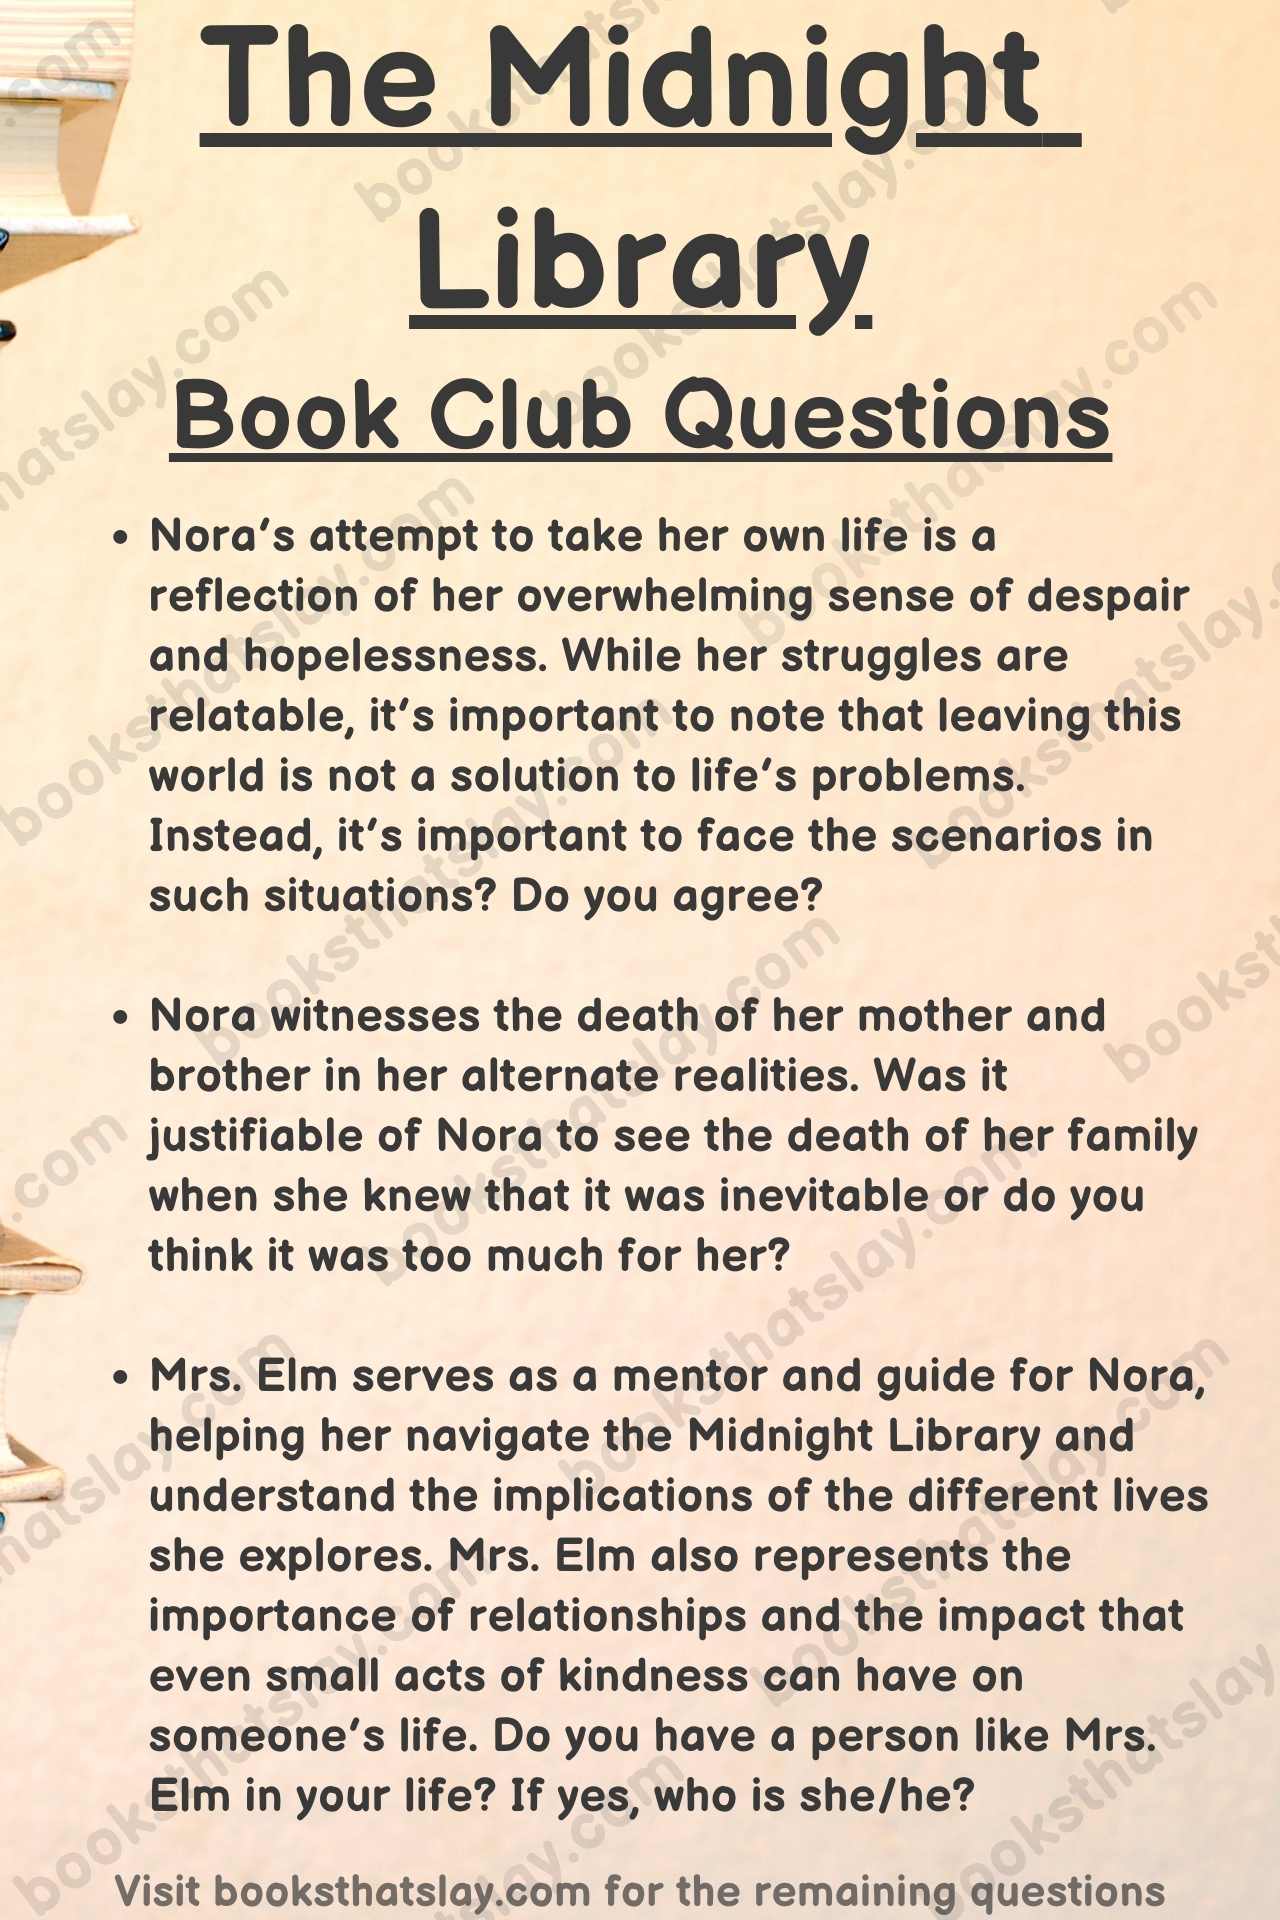 The Midnight Library Book Club Questions
